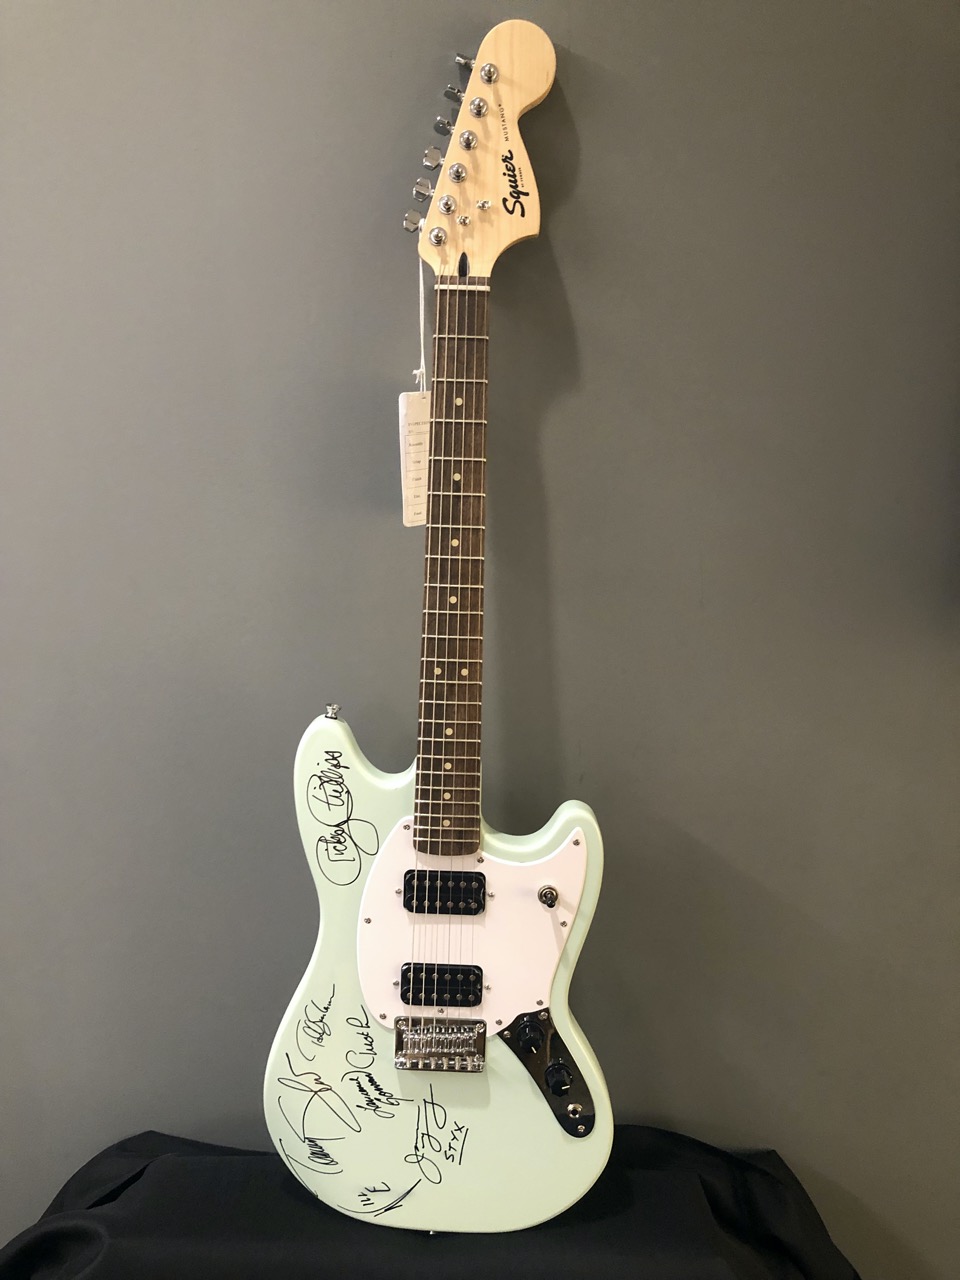 STYX Autographed Guitar